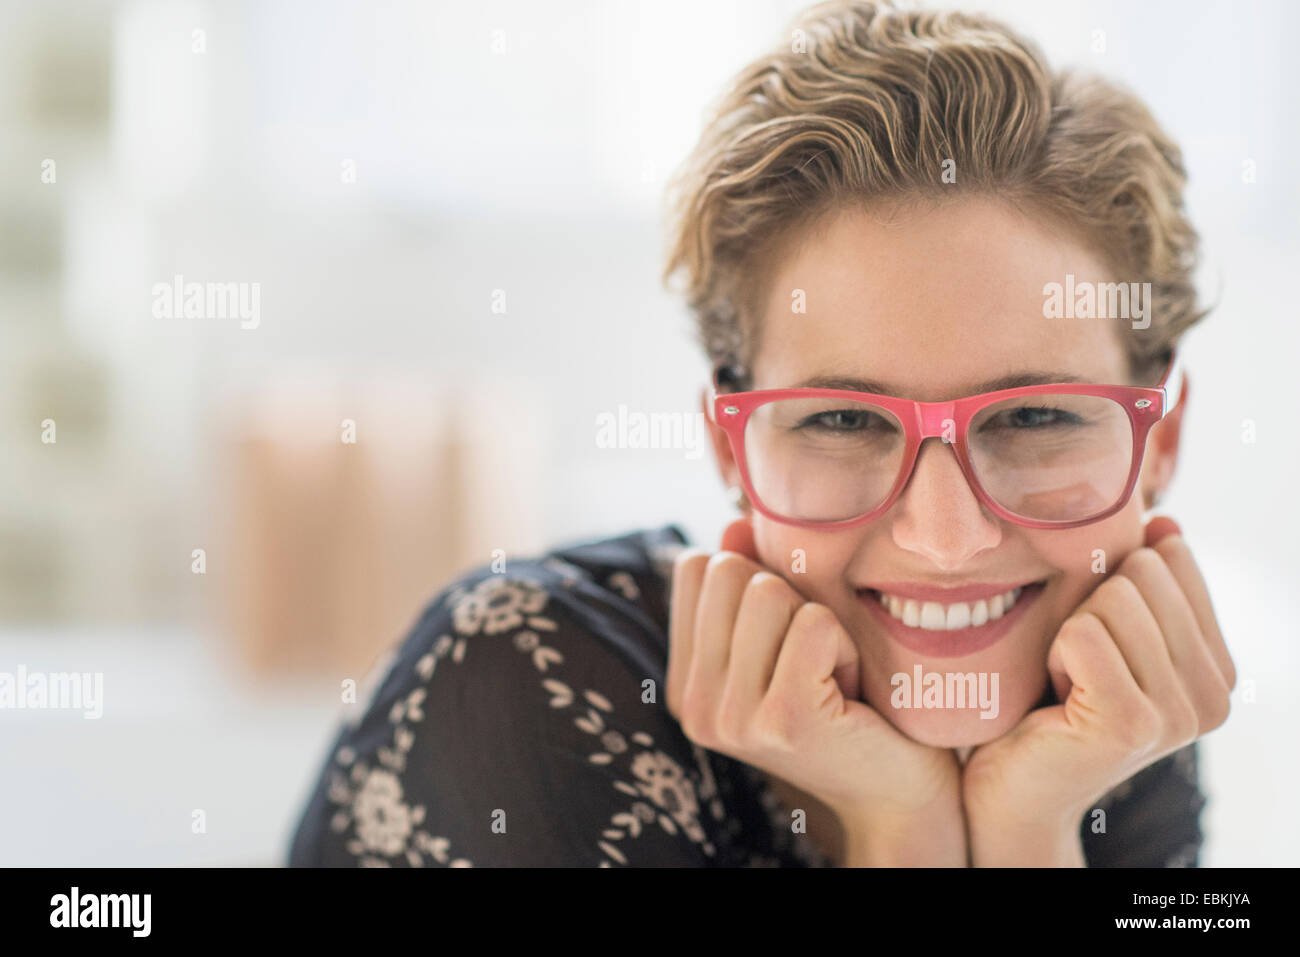 Portrait of smiling young woman wearing glasses Banque D'Images